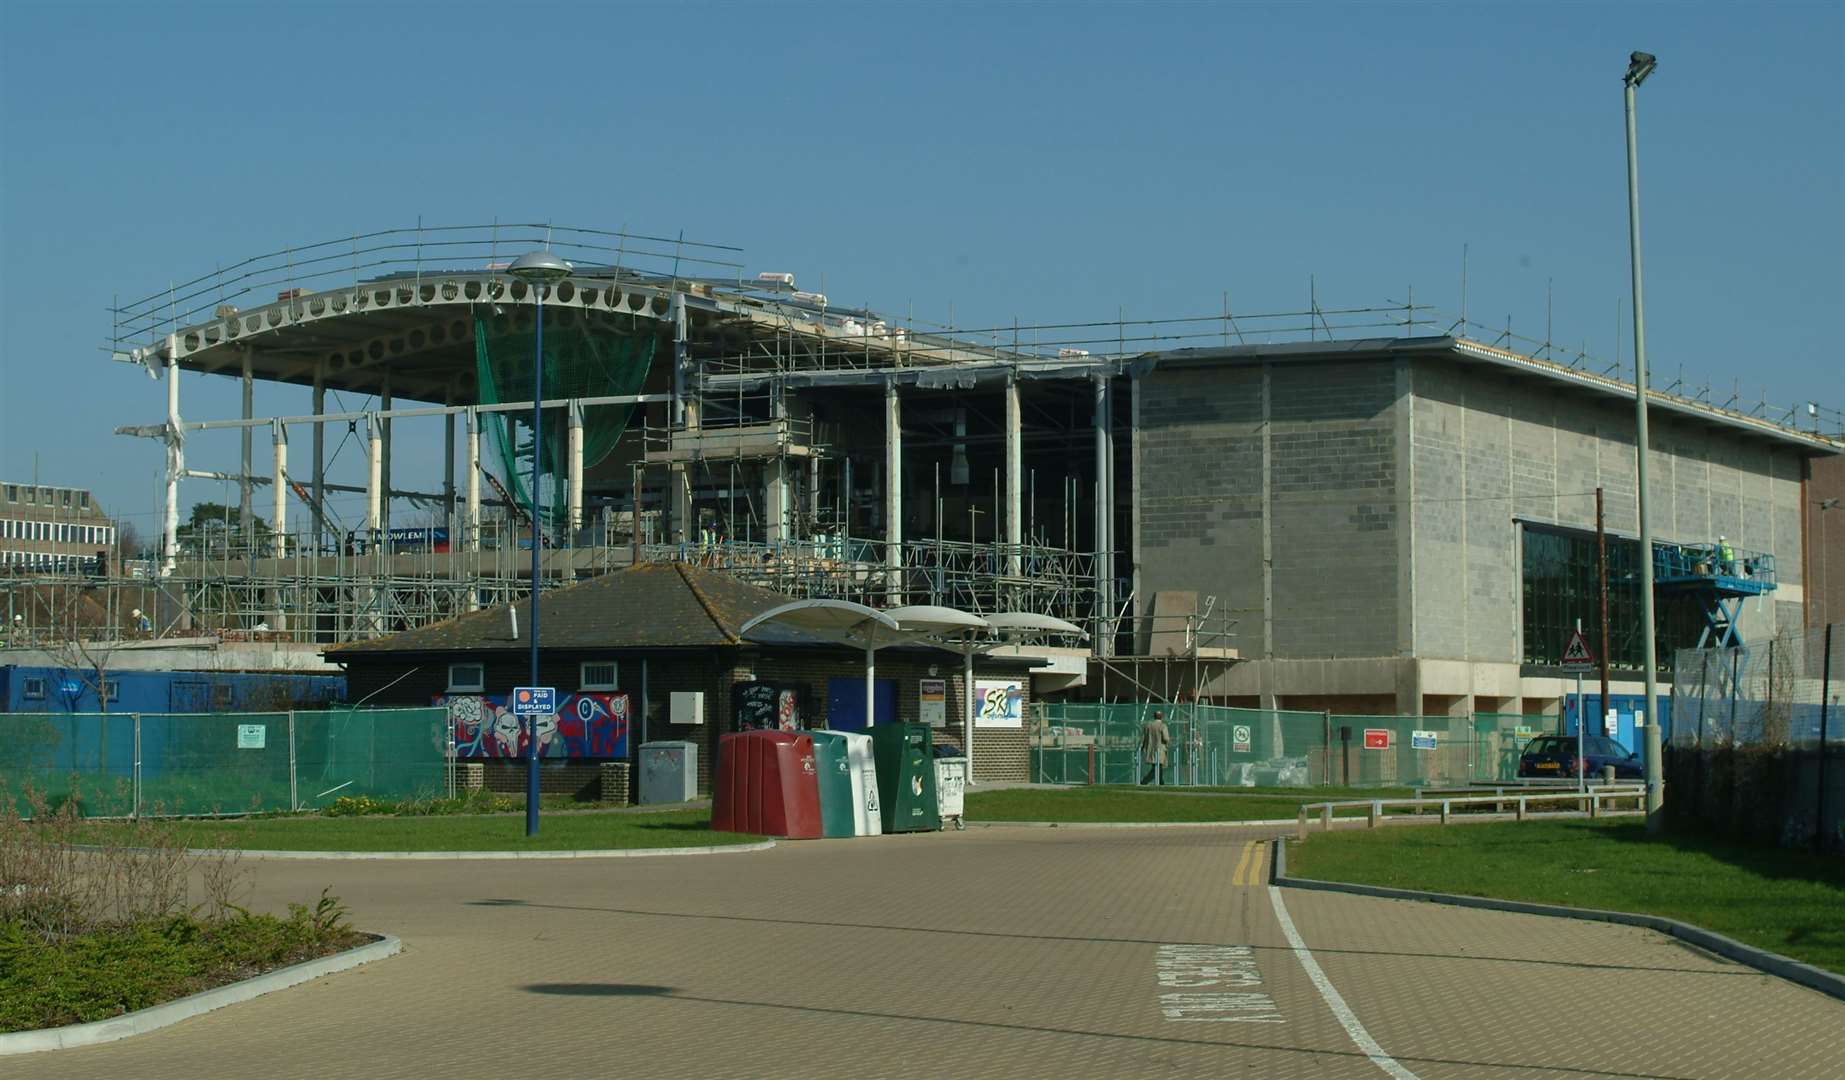 The Stour Centre was last upgraded in the mid-2000s, as this construction photo from 2006 shows